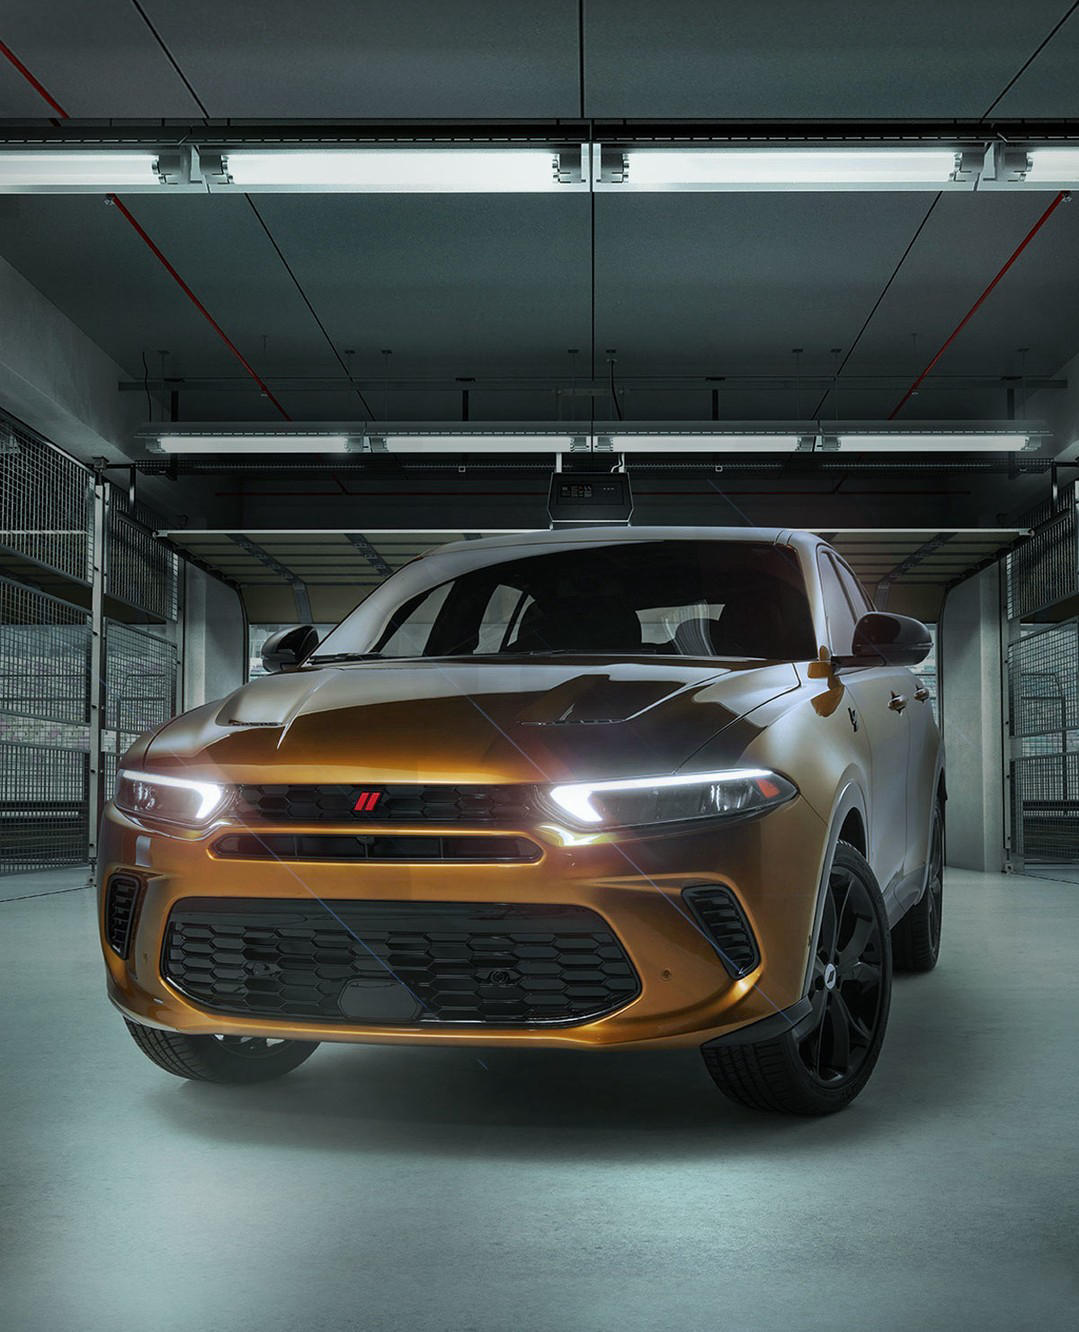 The all-new Dodge Hornet…Ready to join the swarm